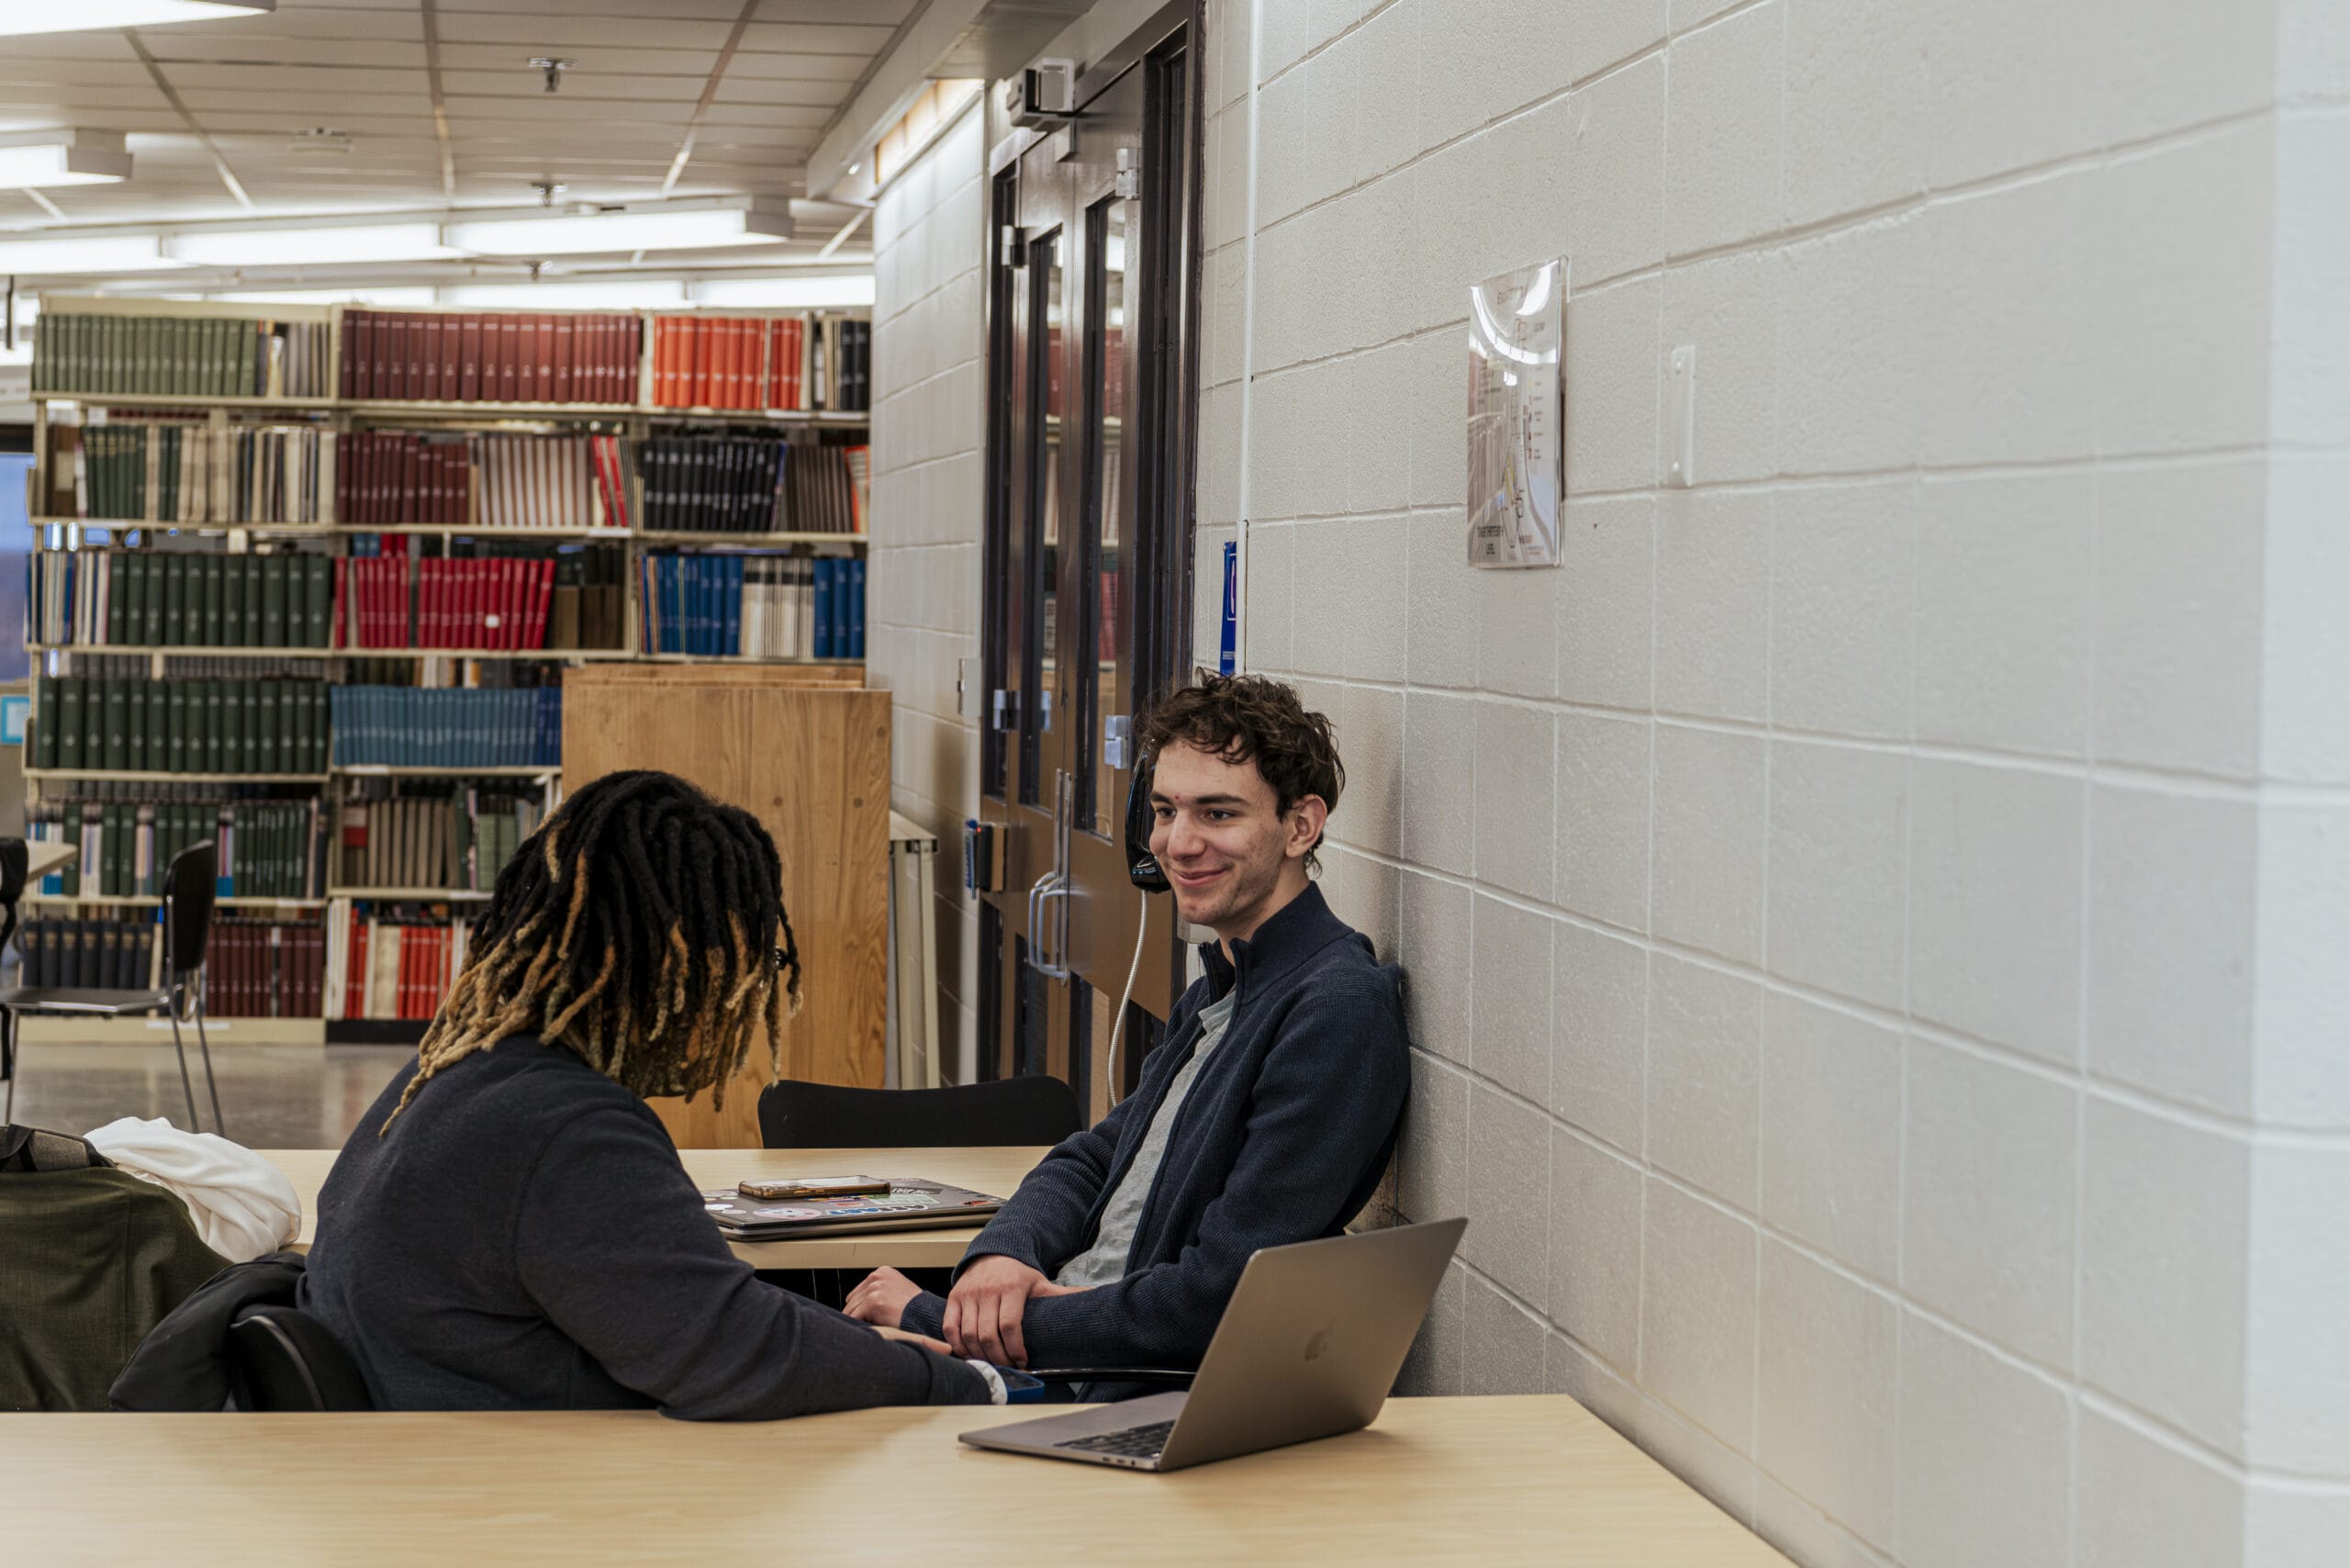 Two students conversing in the Morton R. Godine Library at MassArt.